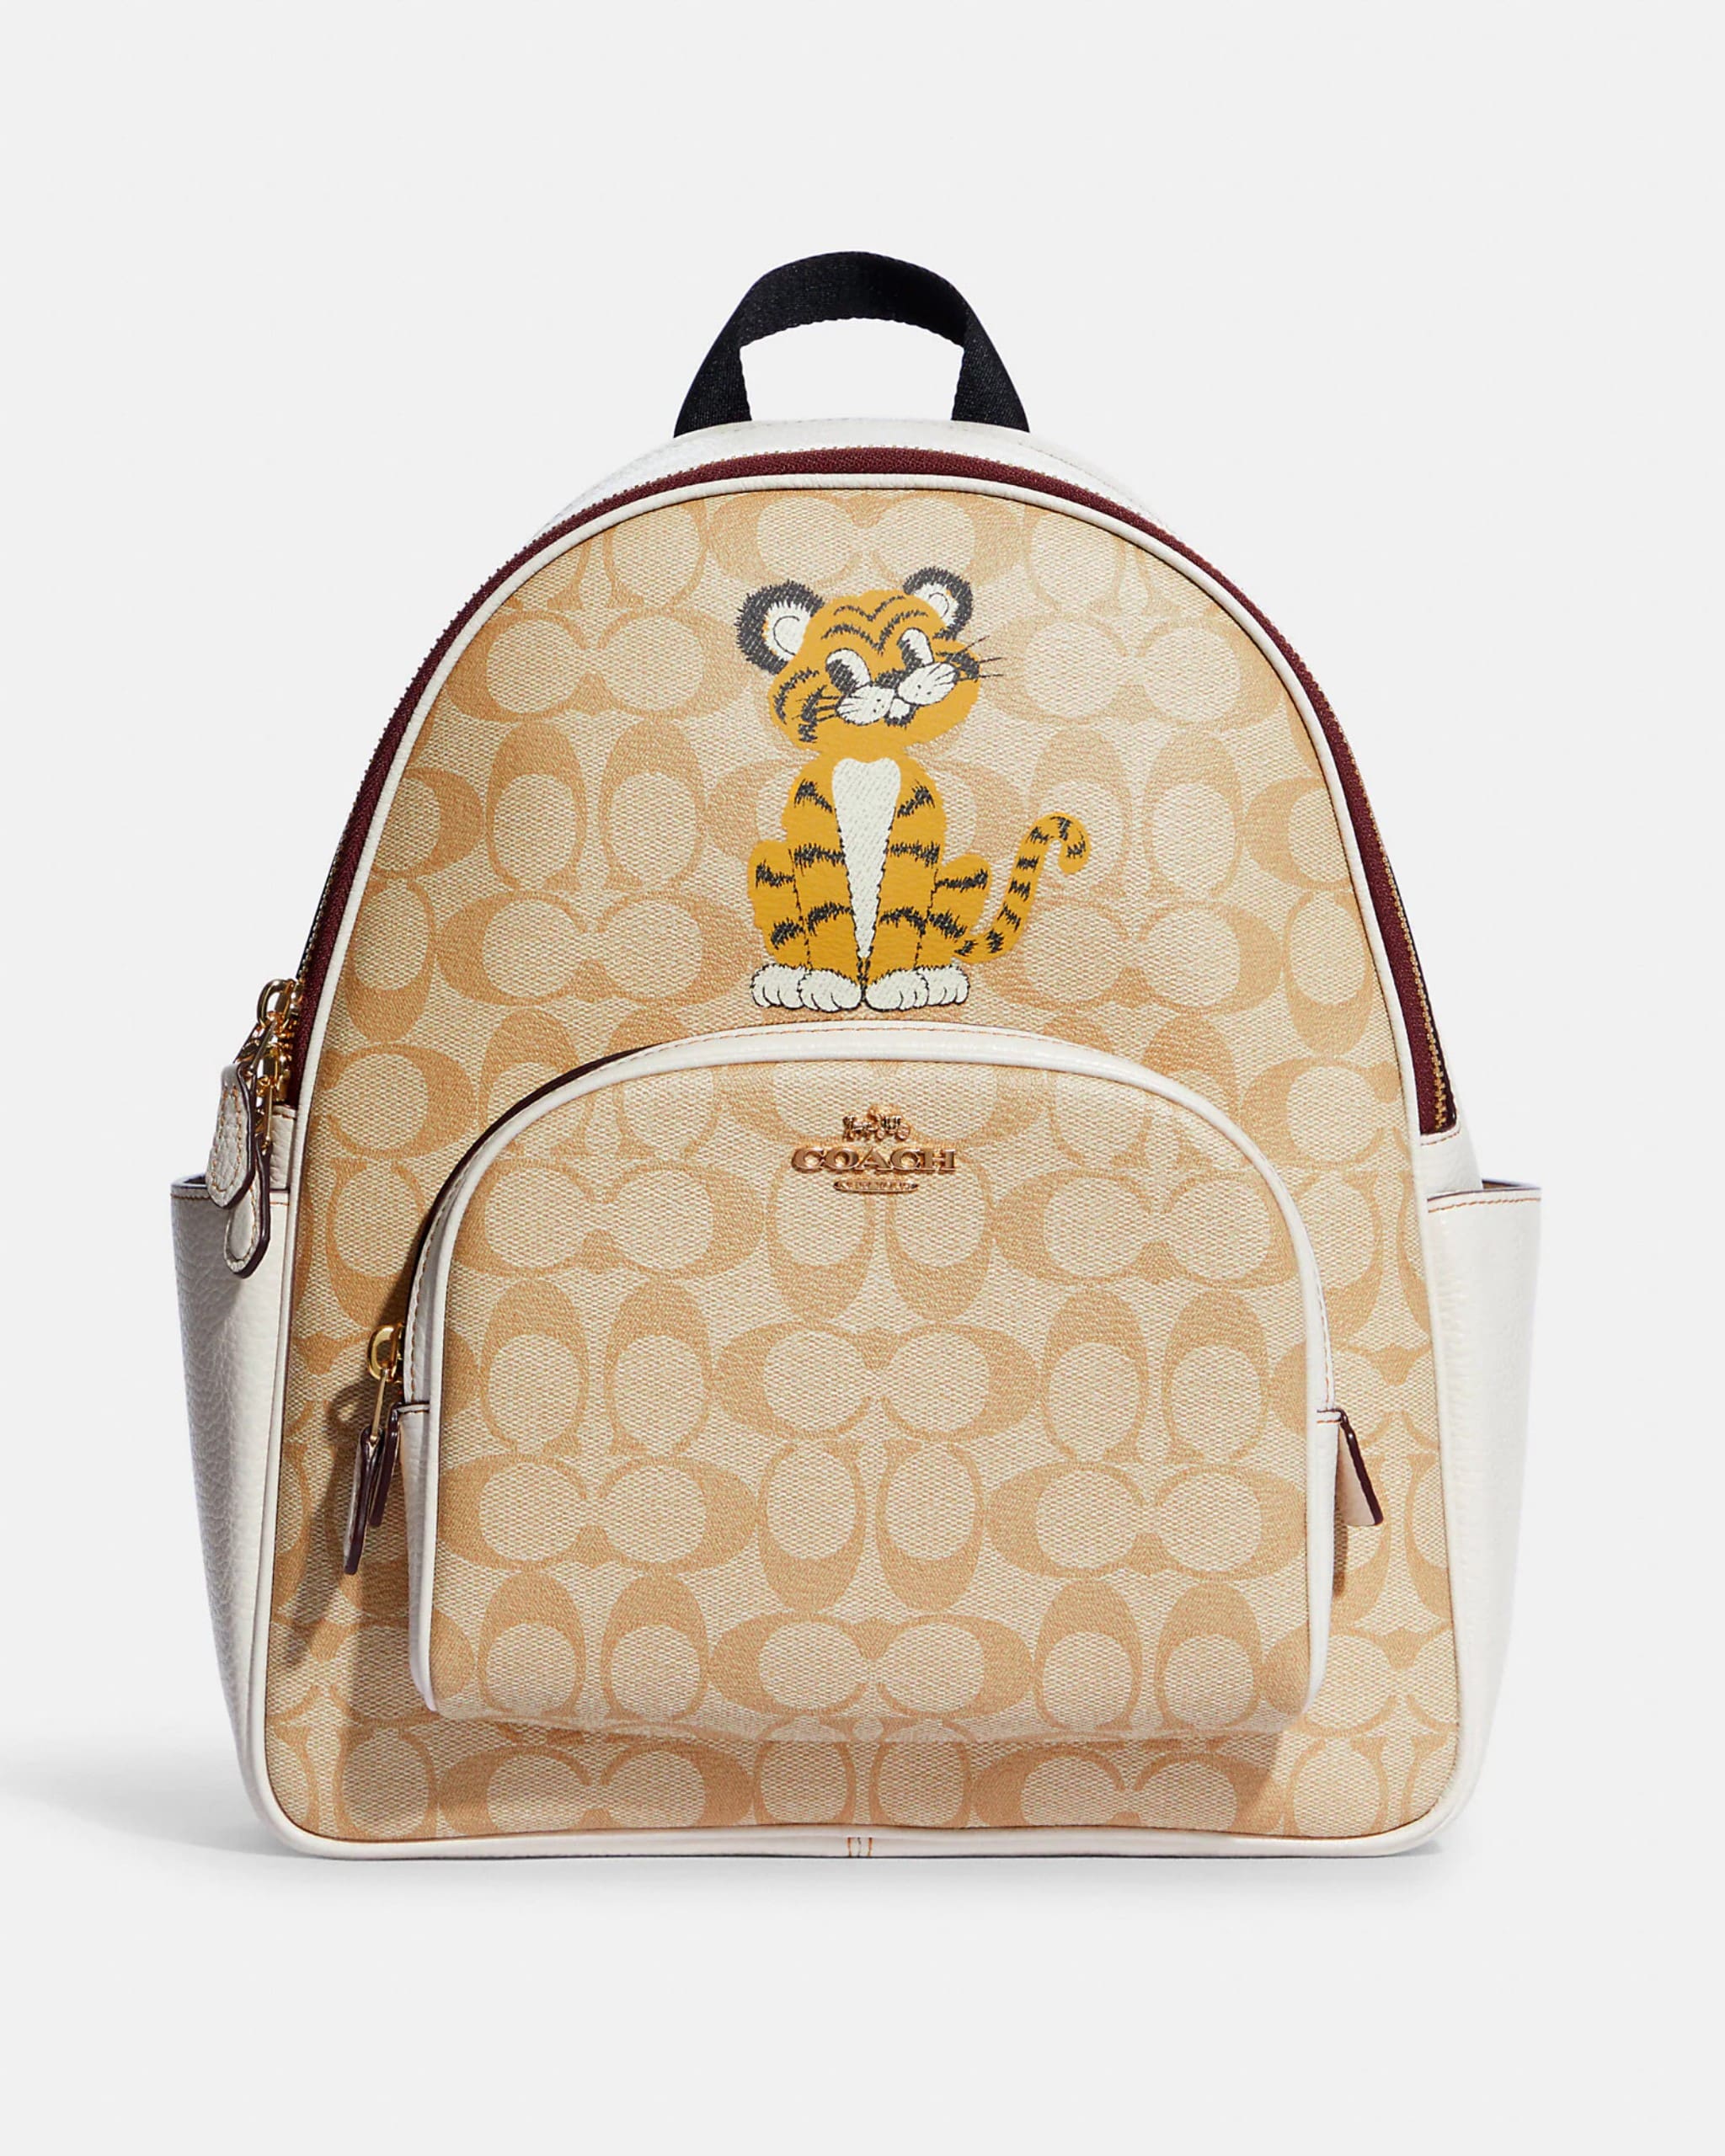 BALO NỮ COACH COURT BACKPACK IN SIGNATURE CANVAS WITH TIGER 3